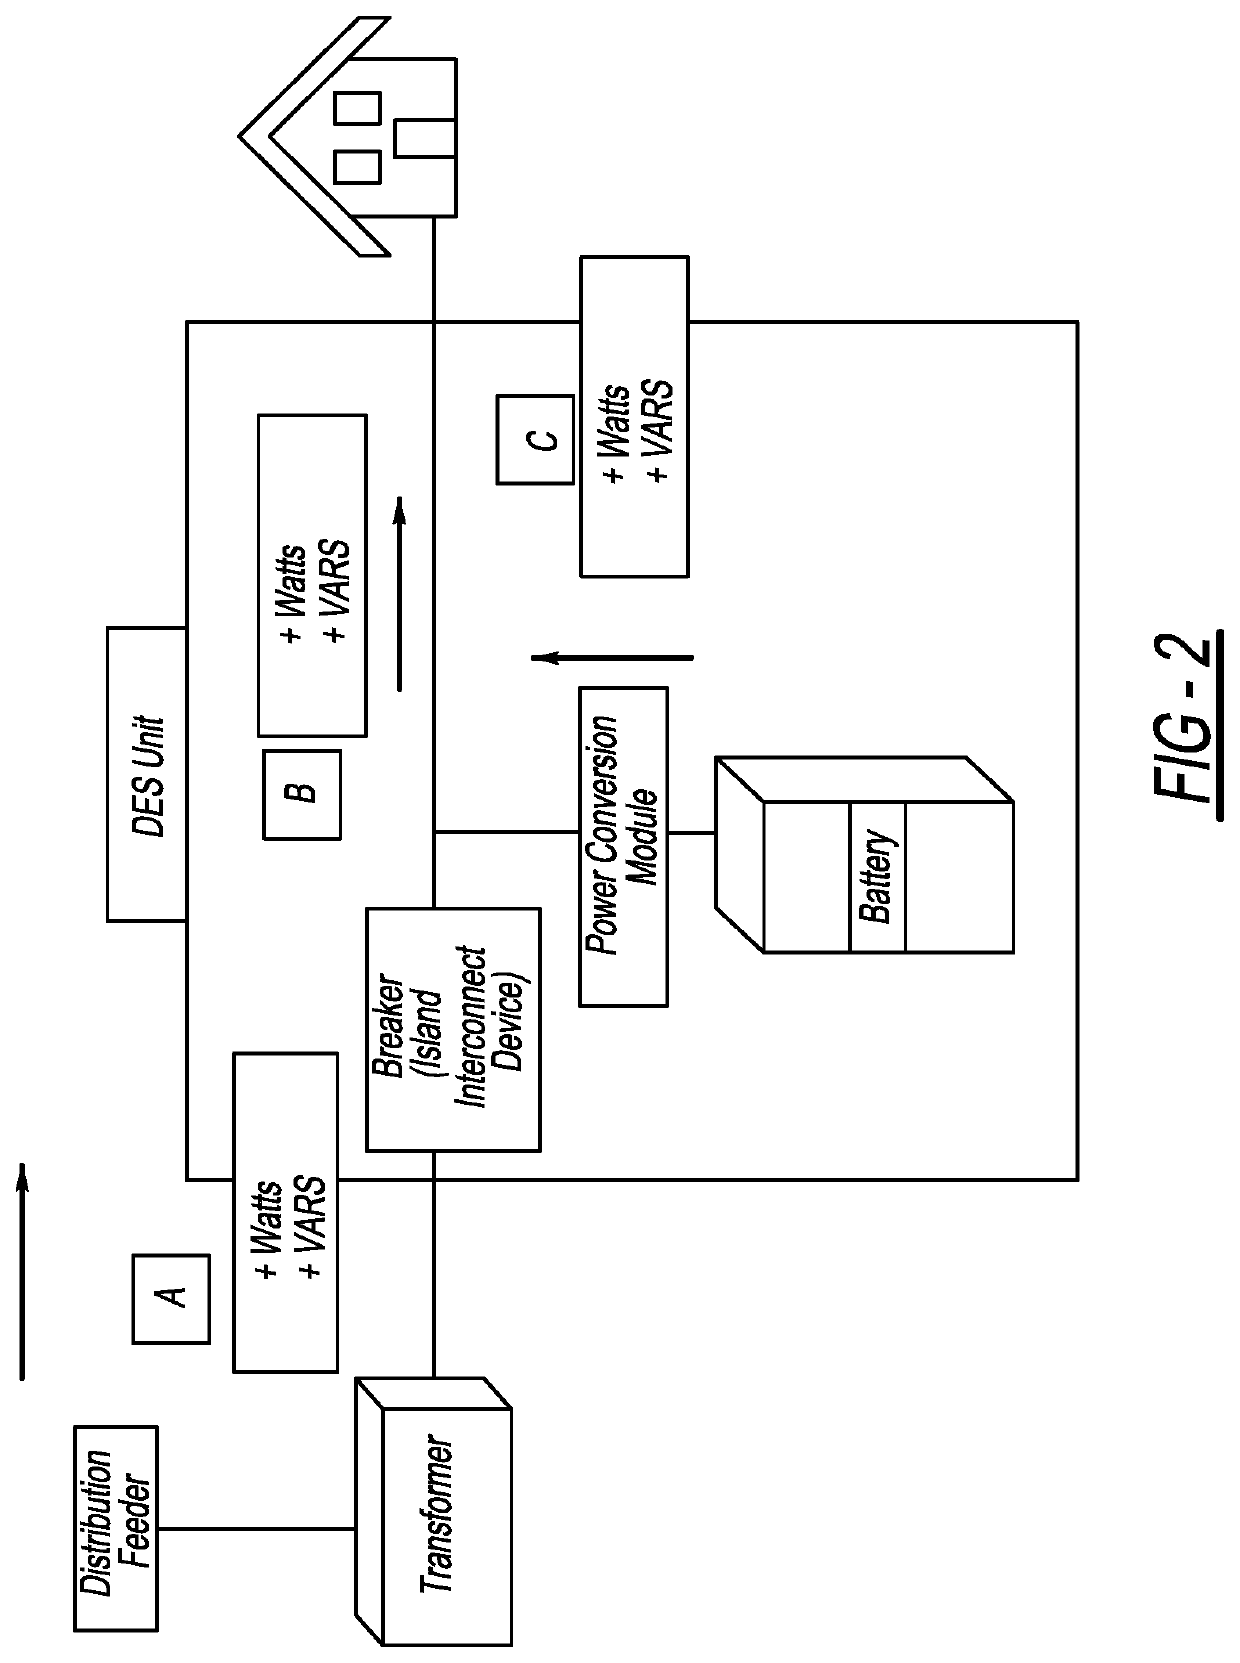 Method to detect utility disturbance and fault direction